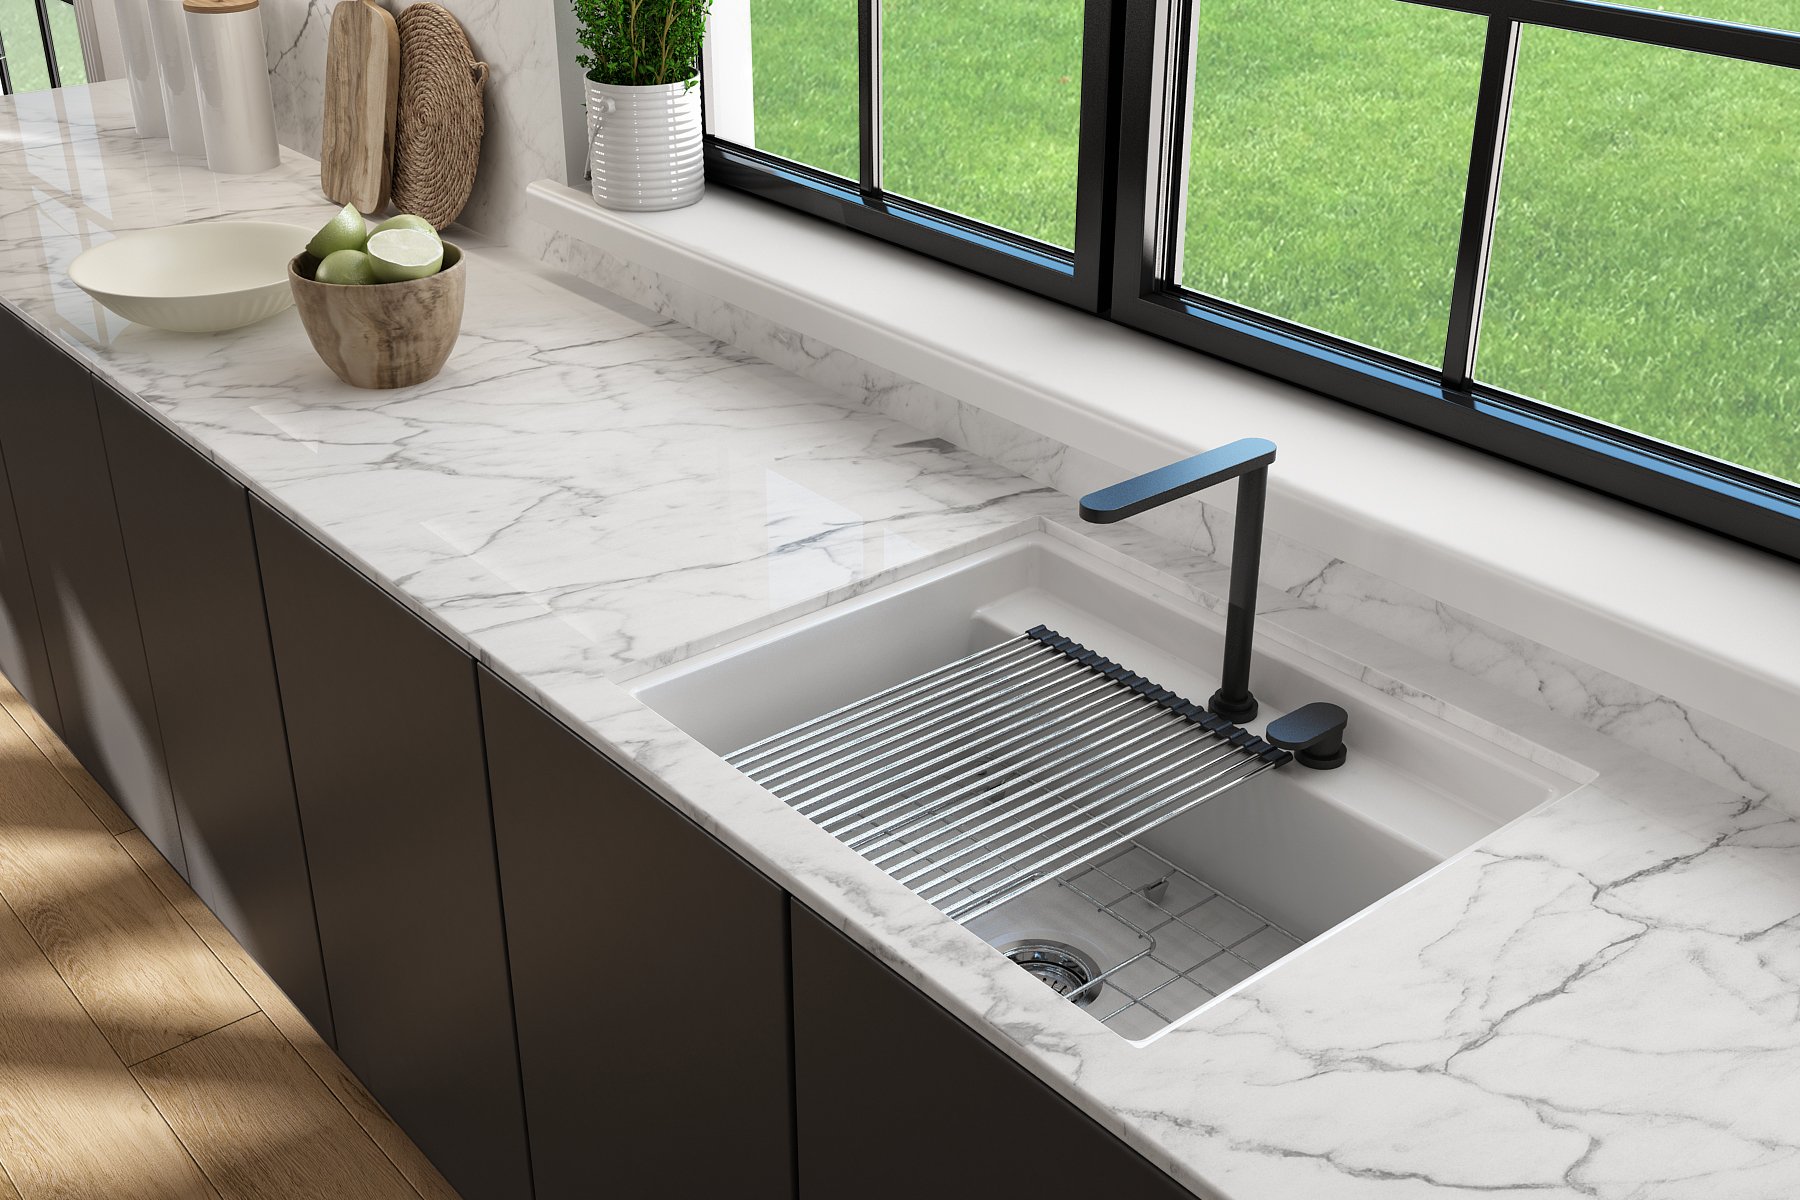 BAVENO 27 with Covers (2-hole faucet setting)